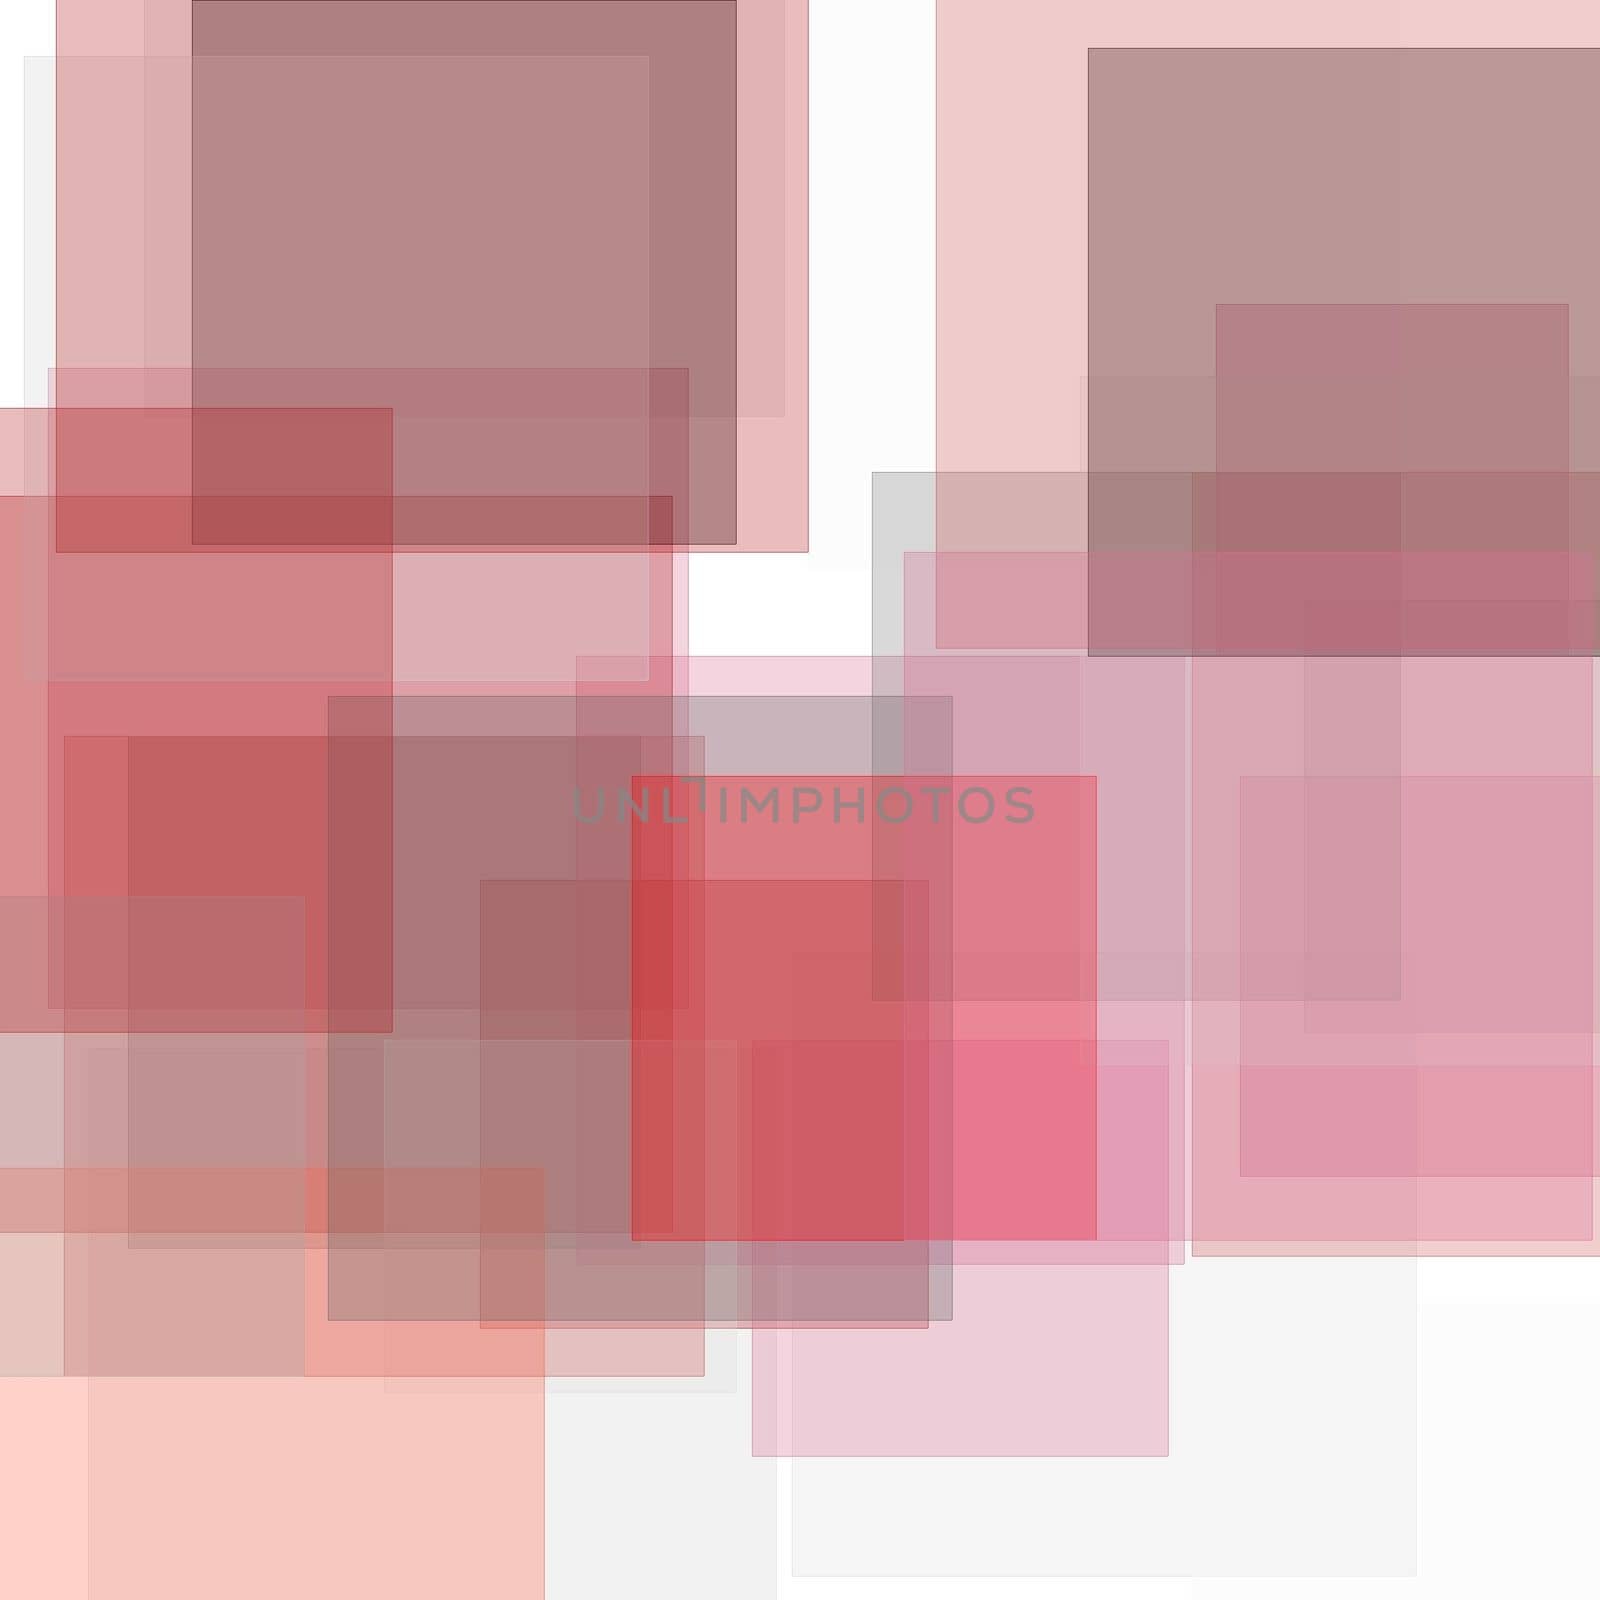 Abstract minimalist red grey illustration with squares useful as a background